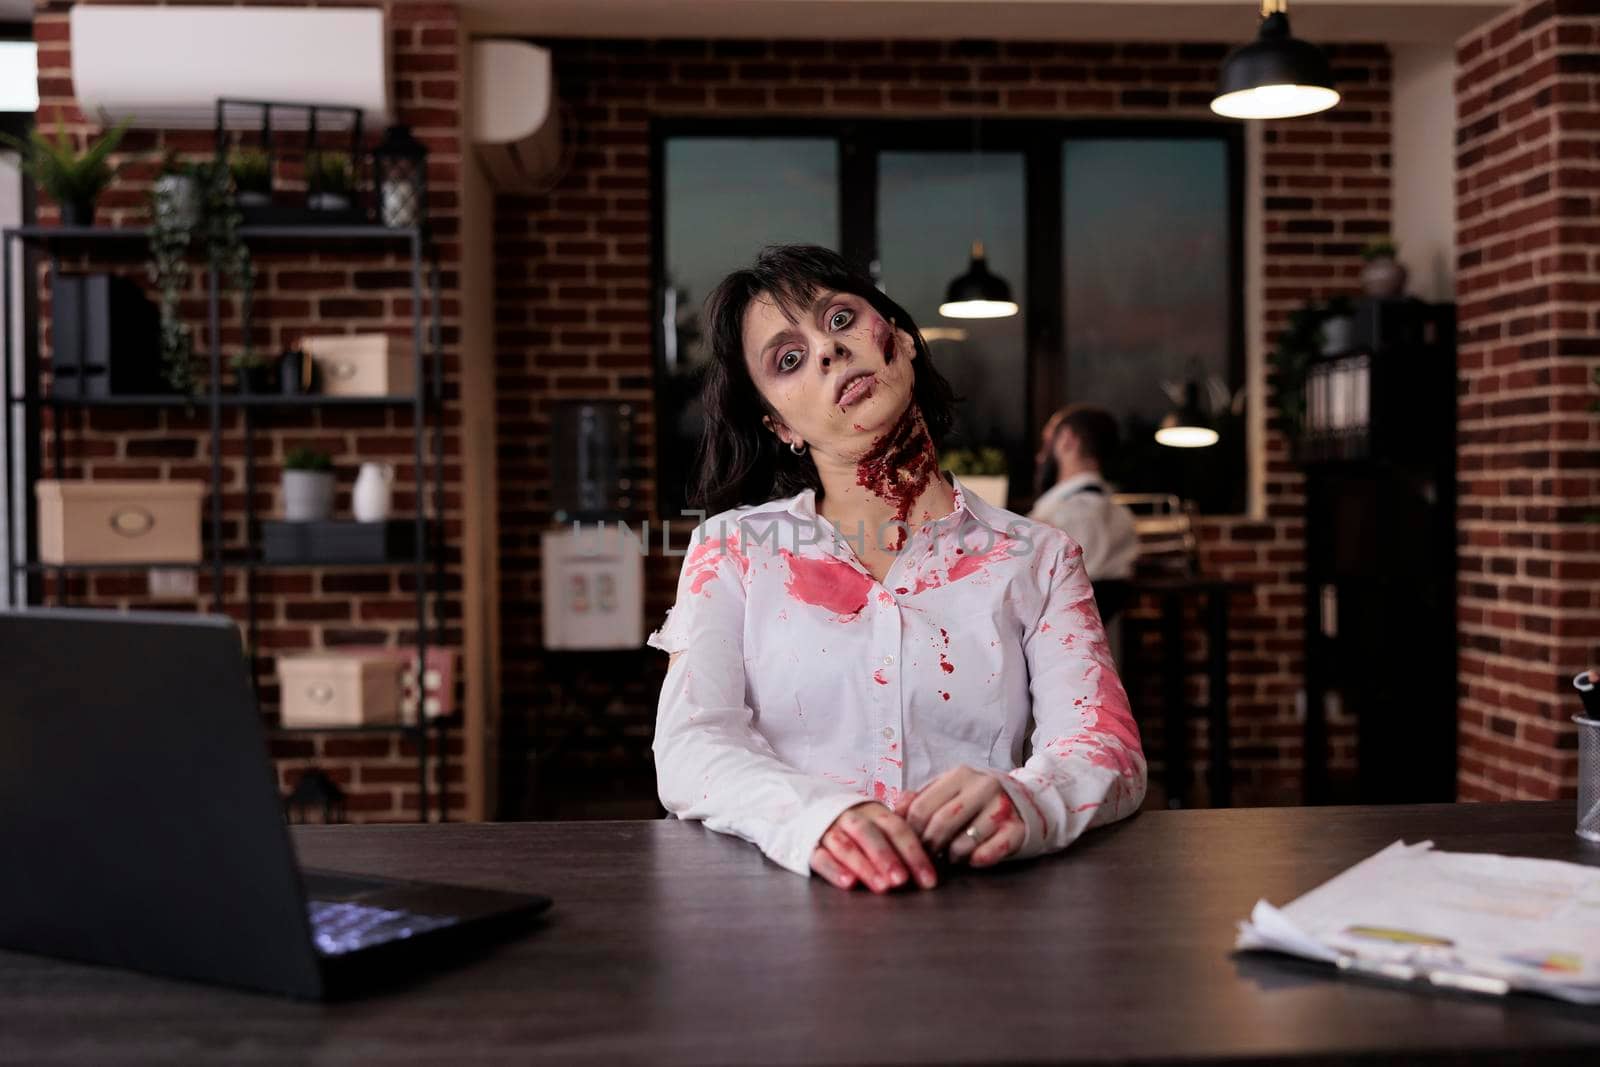 Portrait of creepy woman zombie at office desk, sitting and looking terrifying with wounds and scars. Scary cruel walking dead corpse eating brain and being aggressive, sinister gory nightmare.